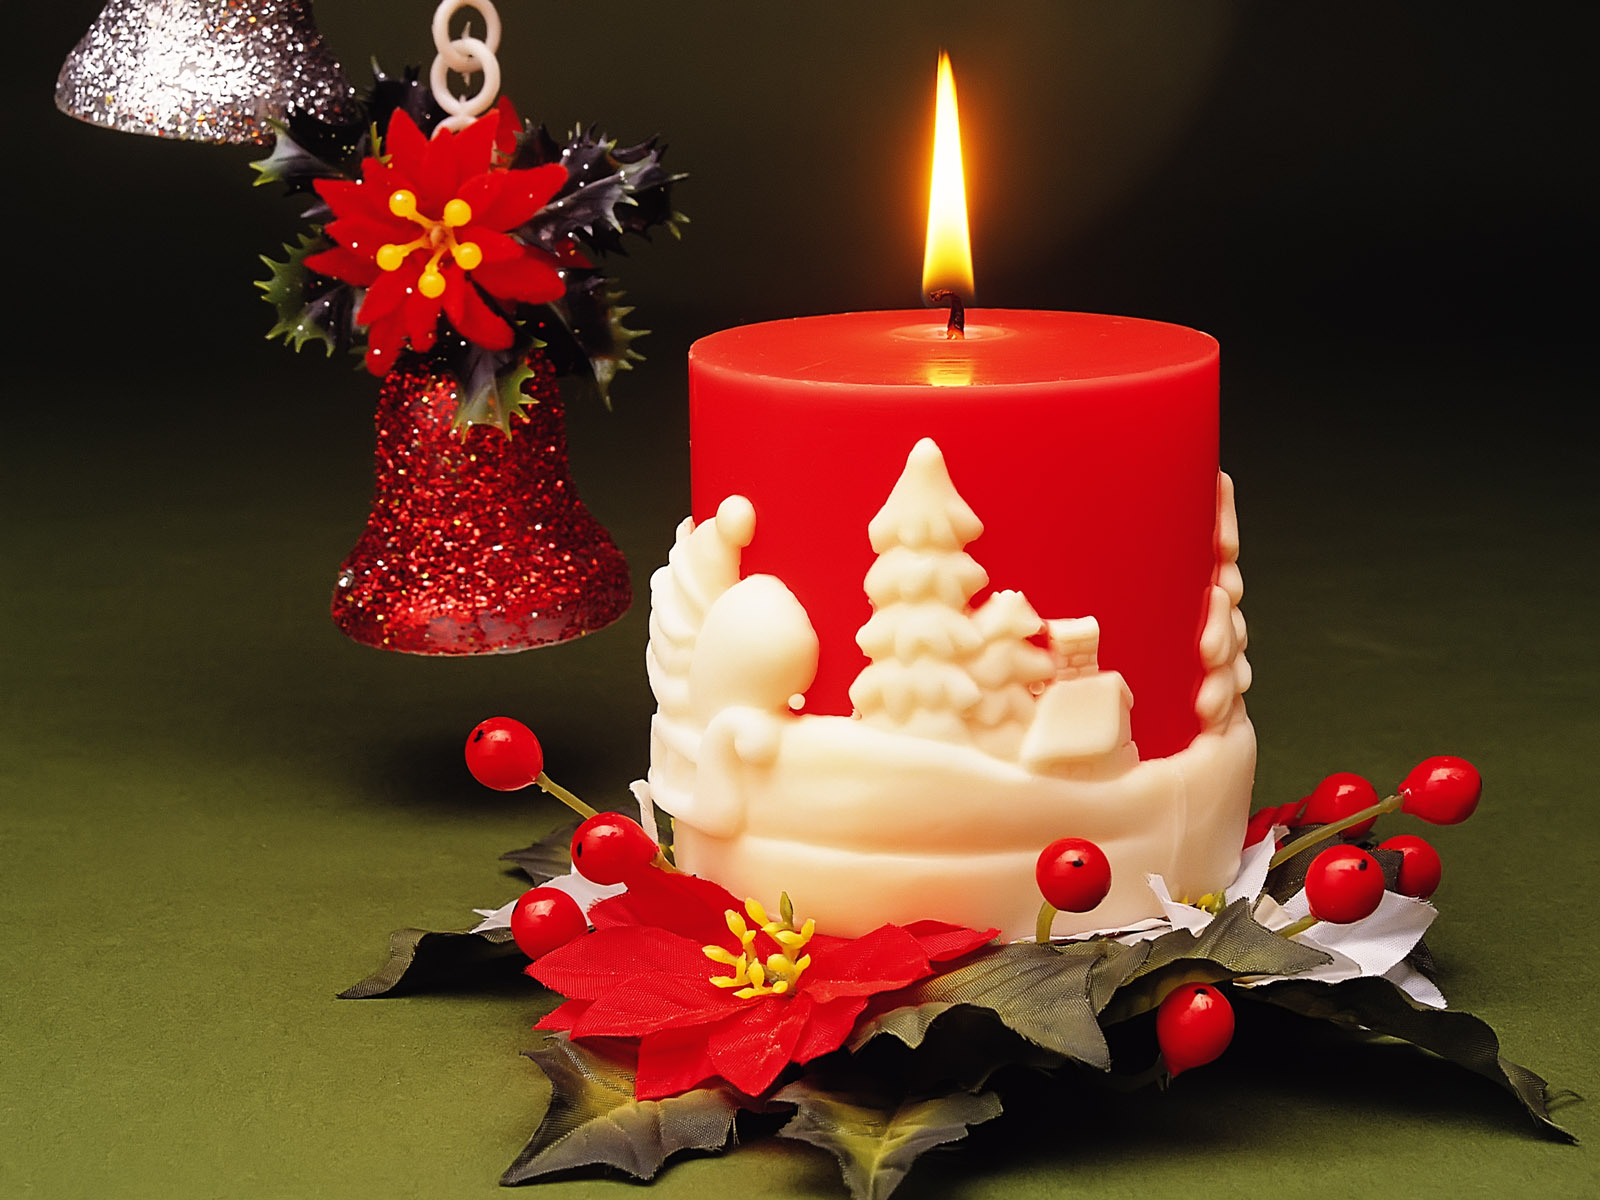 45 Amazing New Year Christmas Candle HR Wallpapers 1600x1200 | HR ...